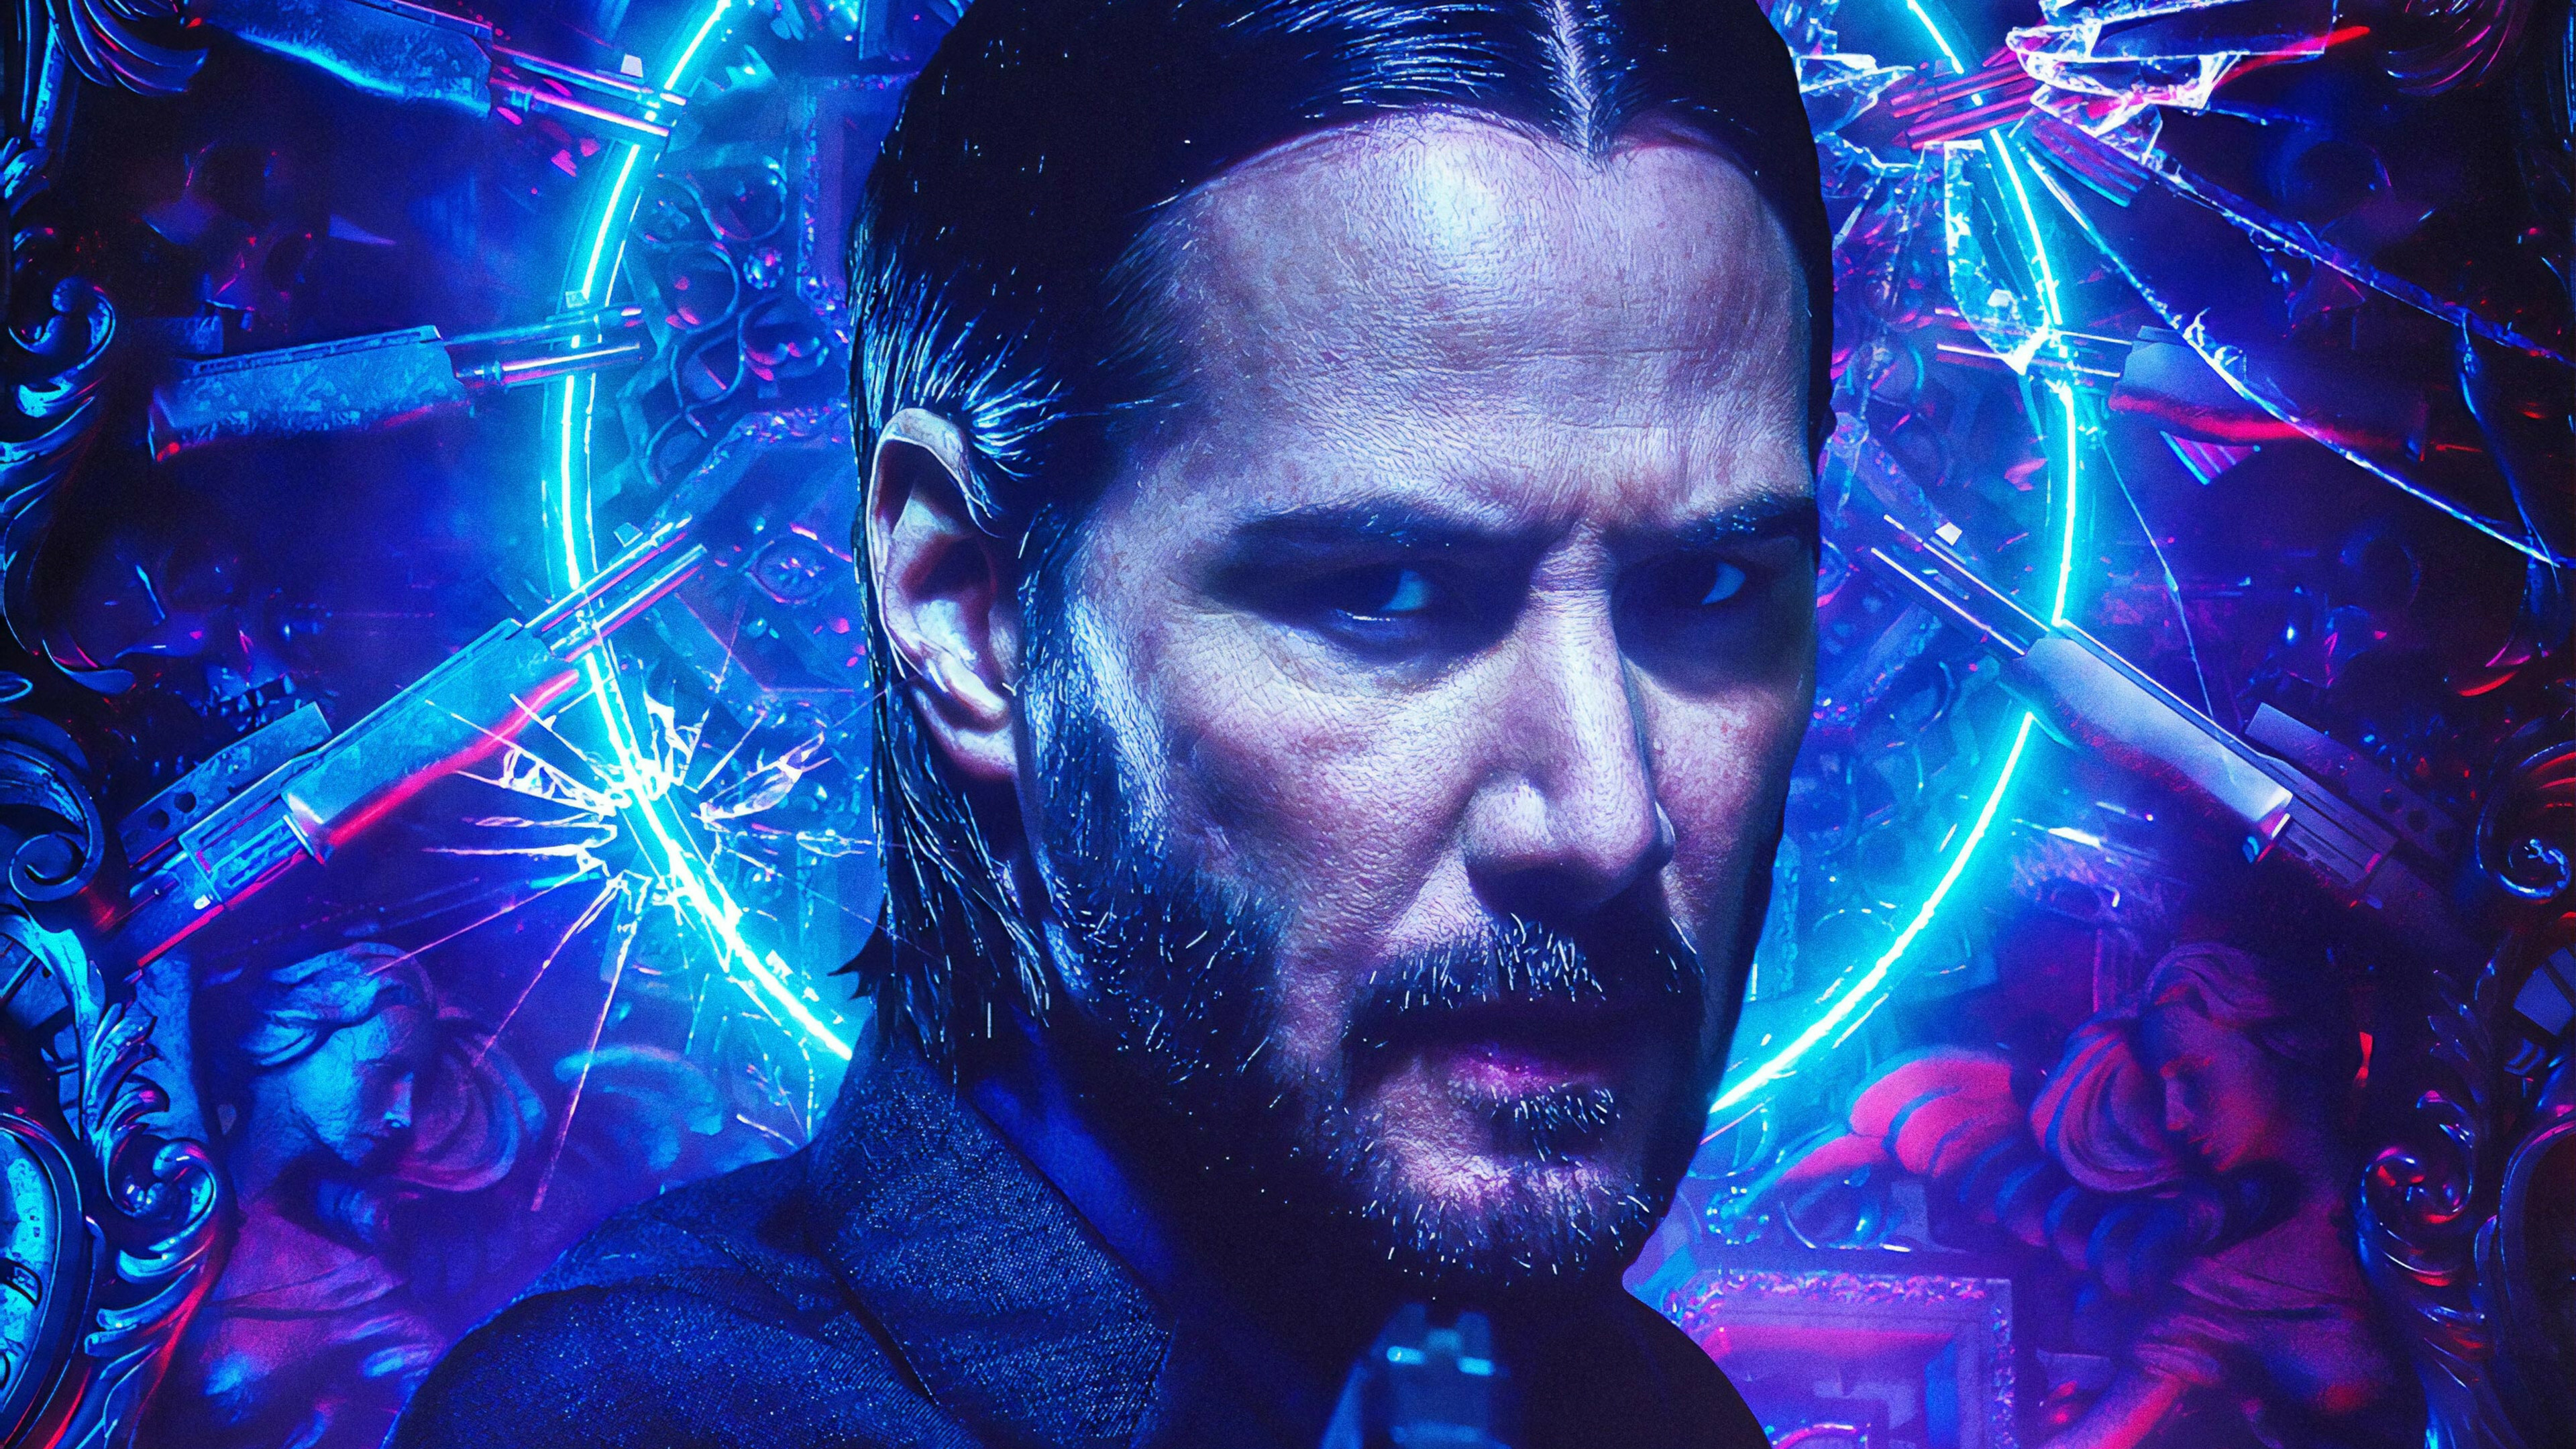 Keanu Reeves: A former hitman, John Wick 3, An American action thriller media franchise. 3840x2160 4K Background.